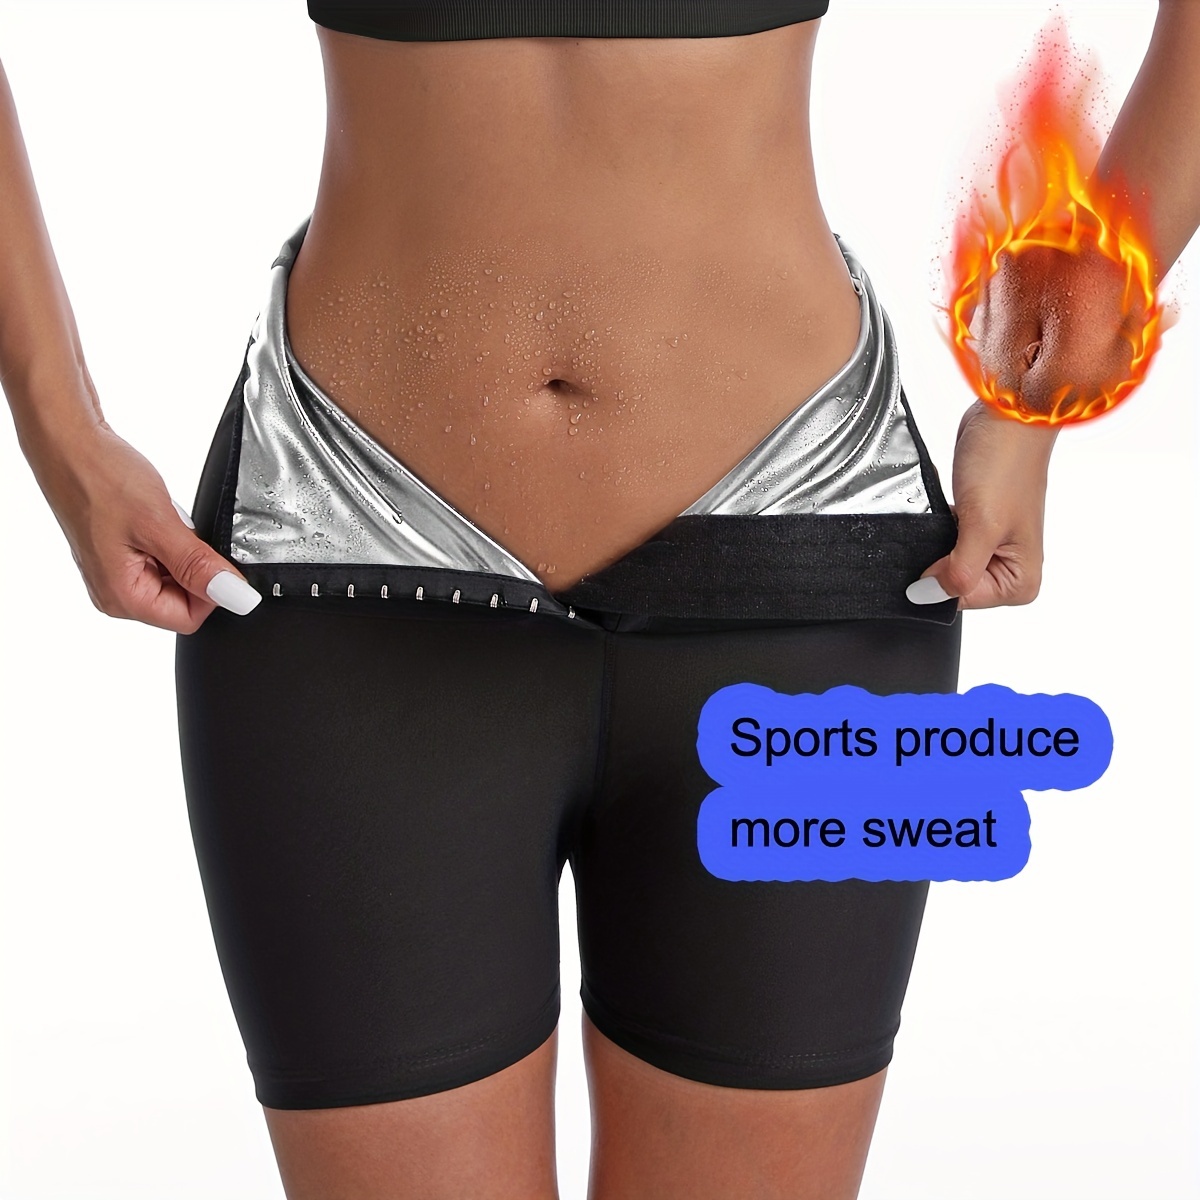 Sporty Waist Trimmer Sweat Band For Slimming And Sweat Reduction Safe Sauna  Wrap For Fat Tummy Control Drop Delivery Health And Beauty Accessory DH7Ro  From Babyskirt, $5.32